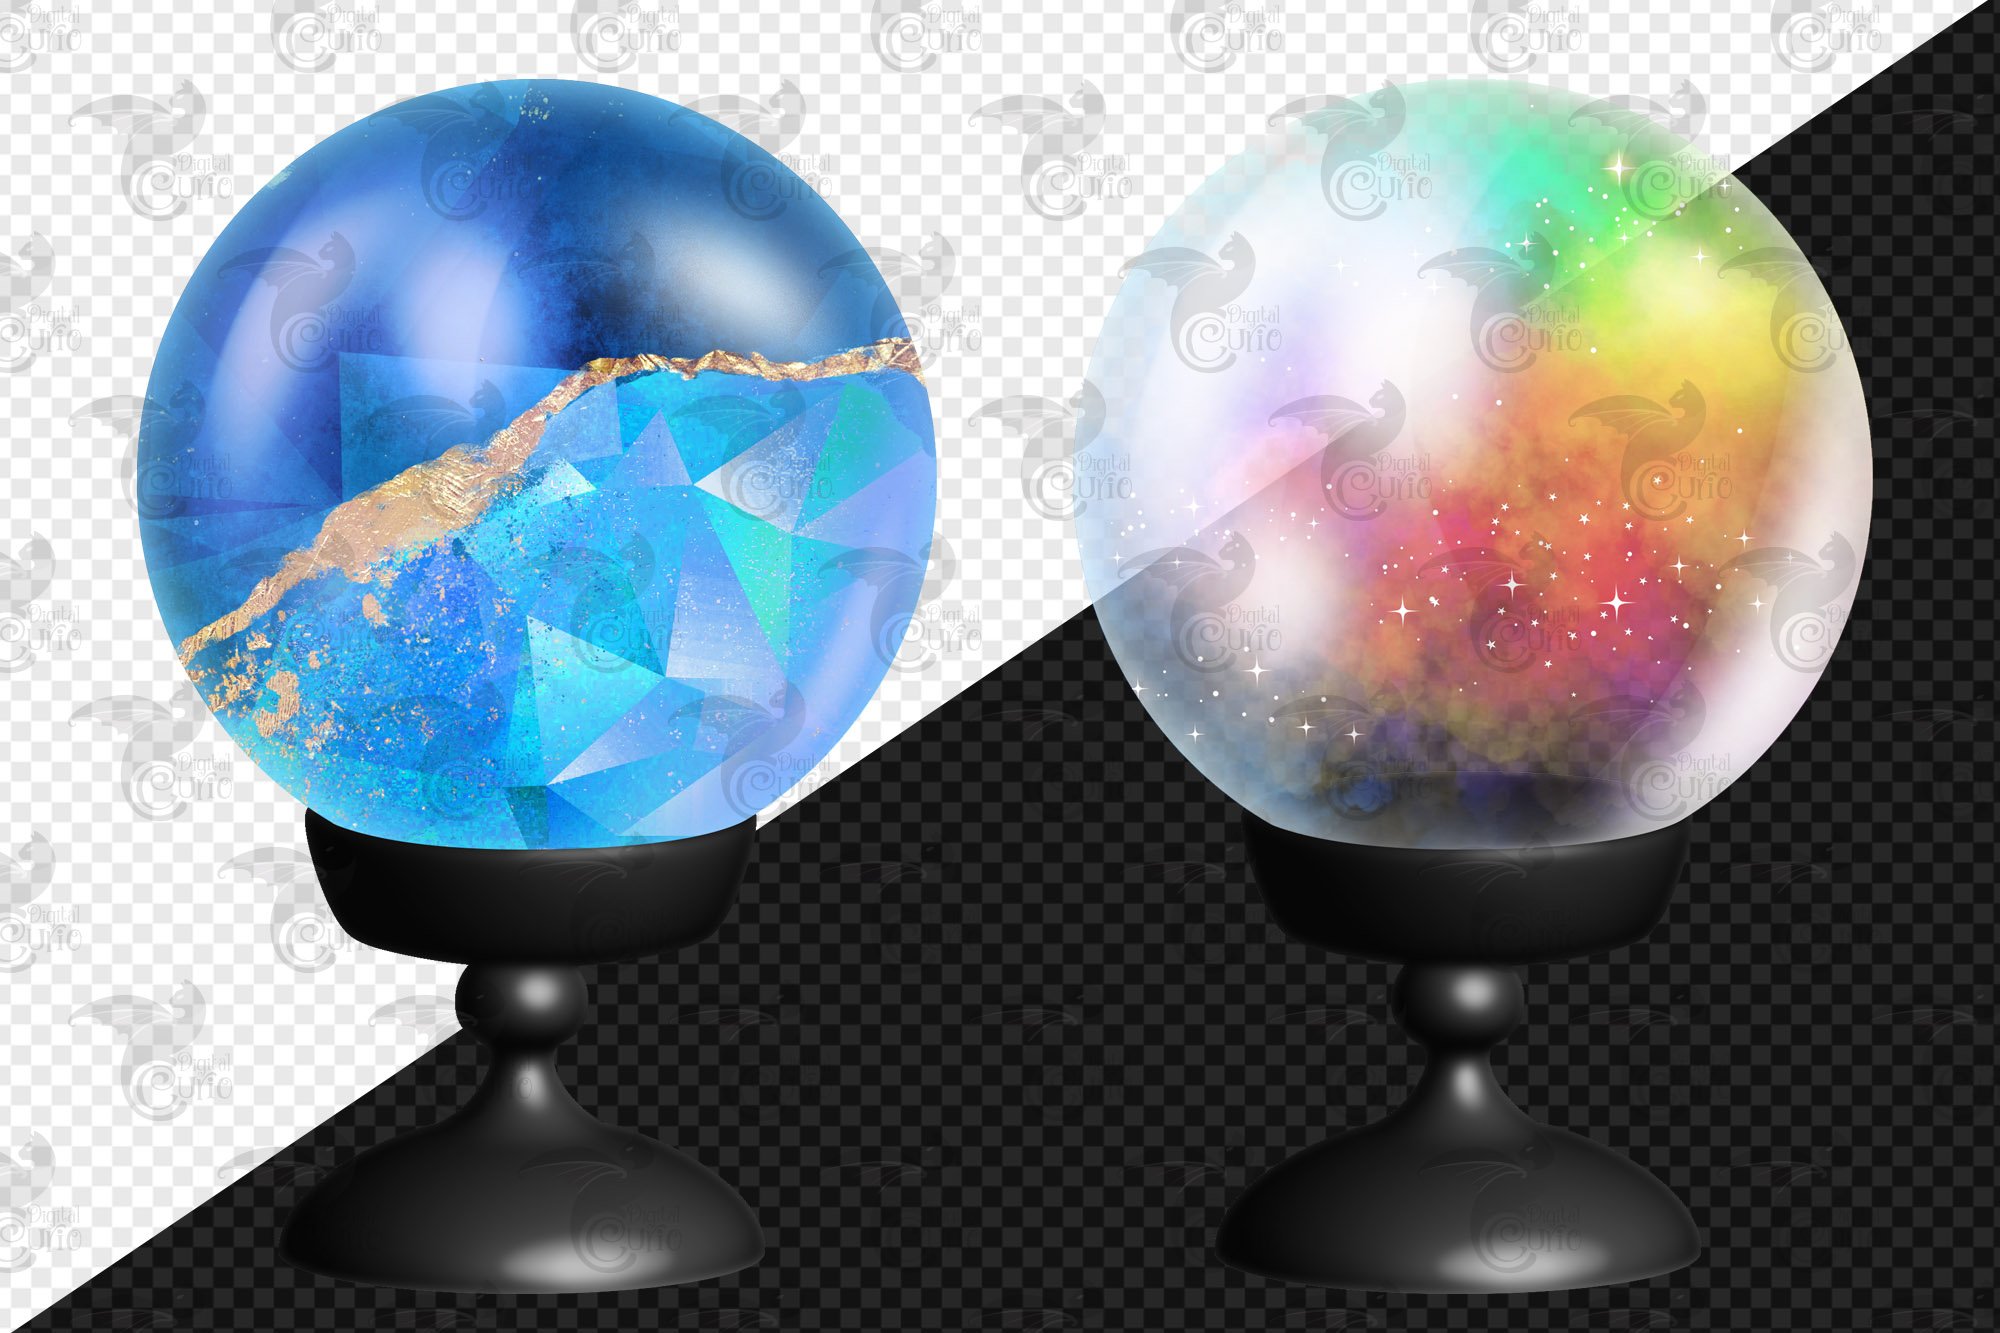 crystal ball clipart preview 3 778